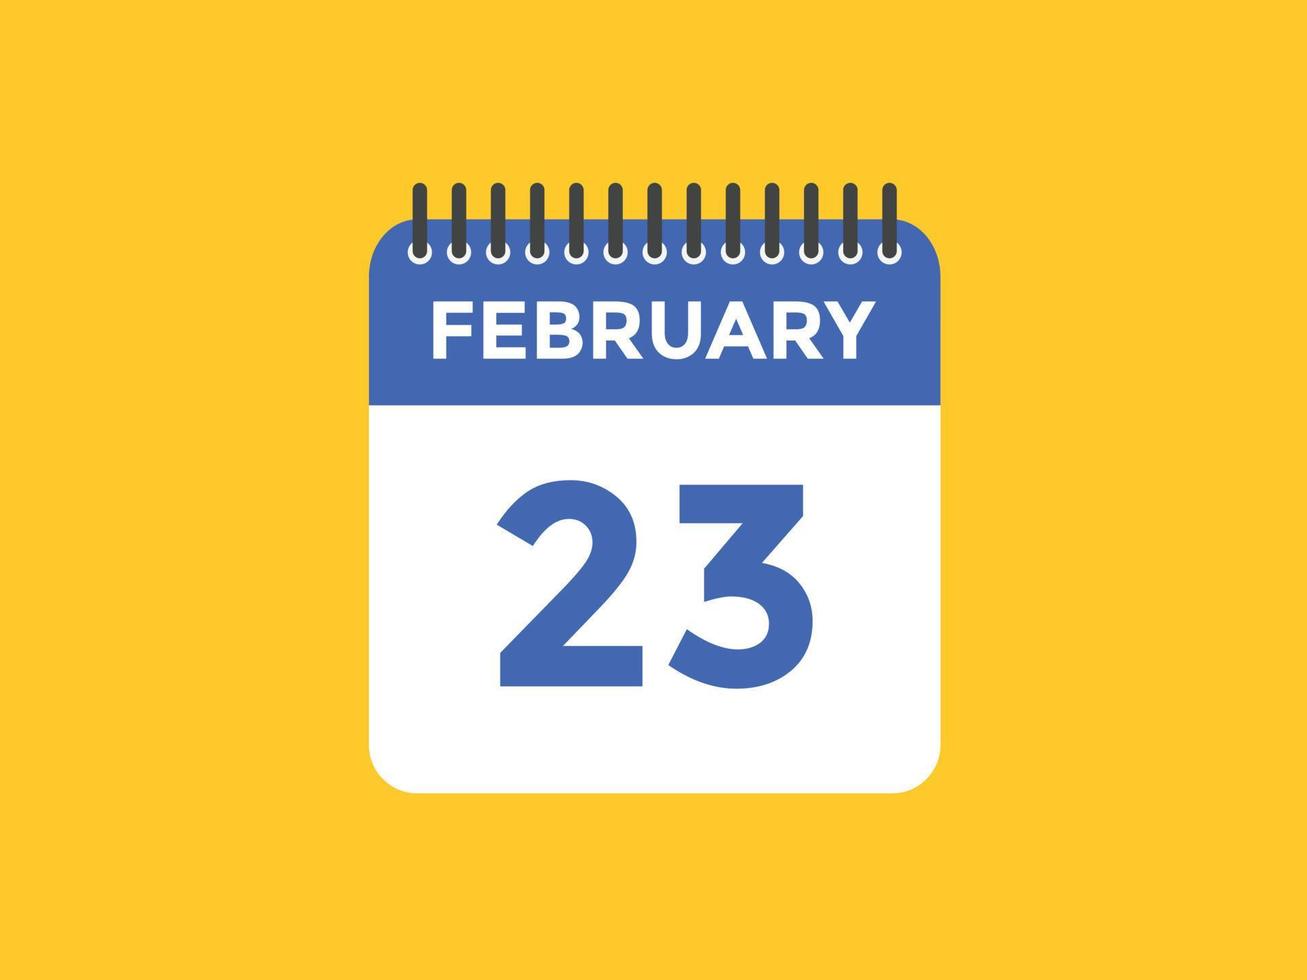 february 23 calendar reminder. 23th february daily calendar icon template. Calendar 23th february icon Design template. Vector illustration